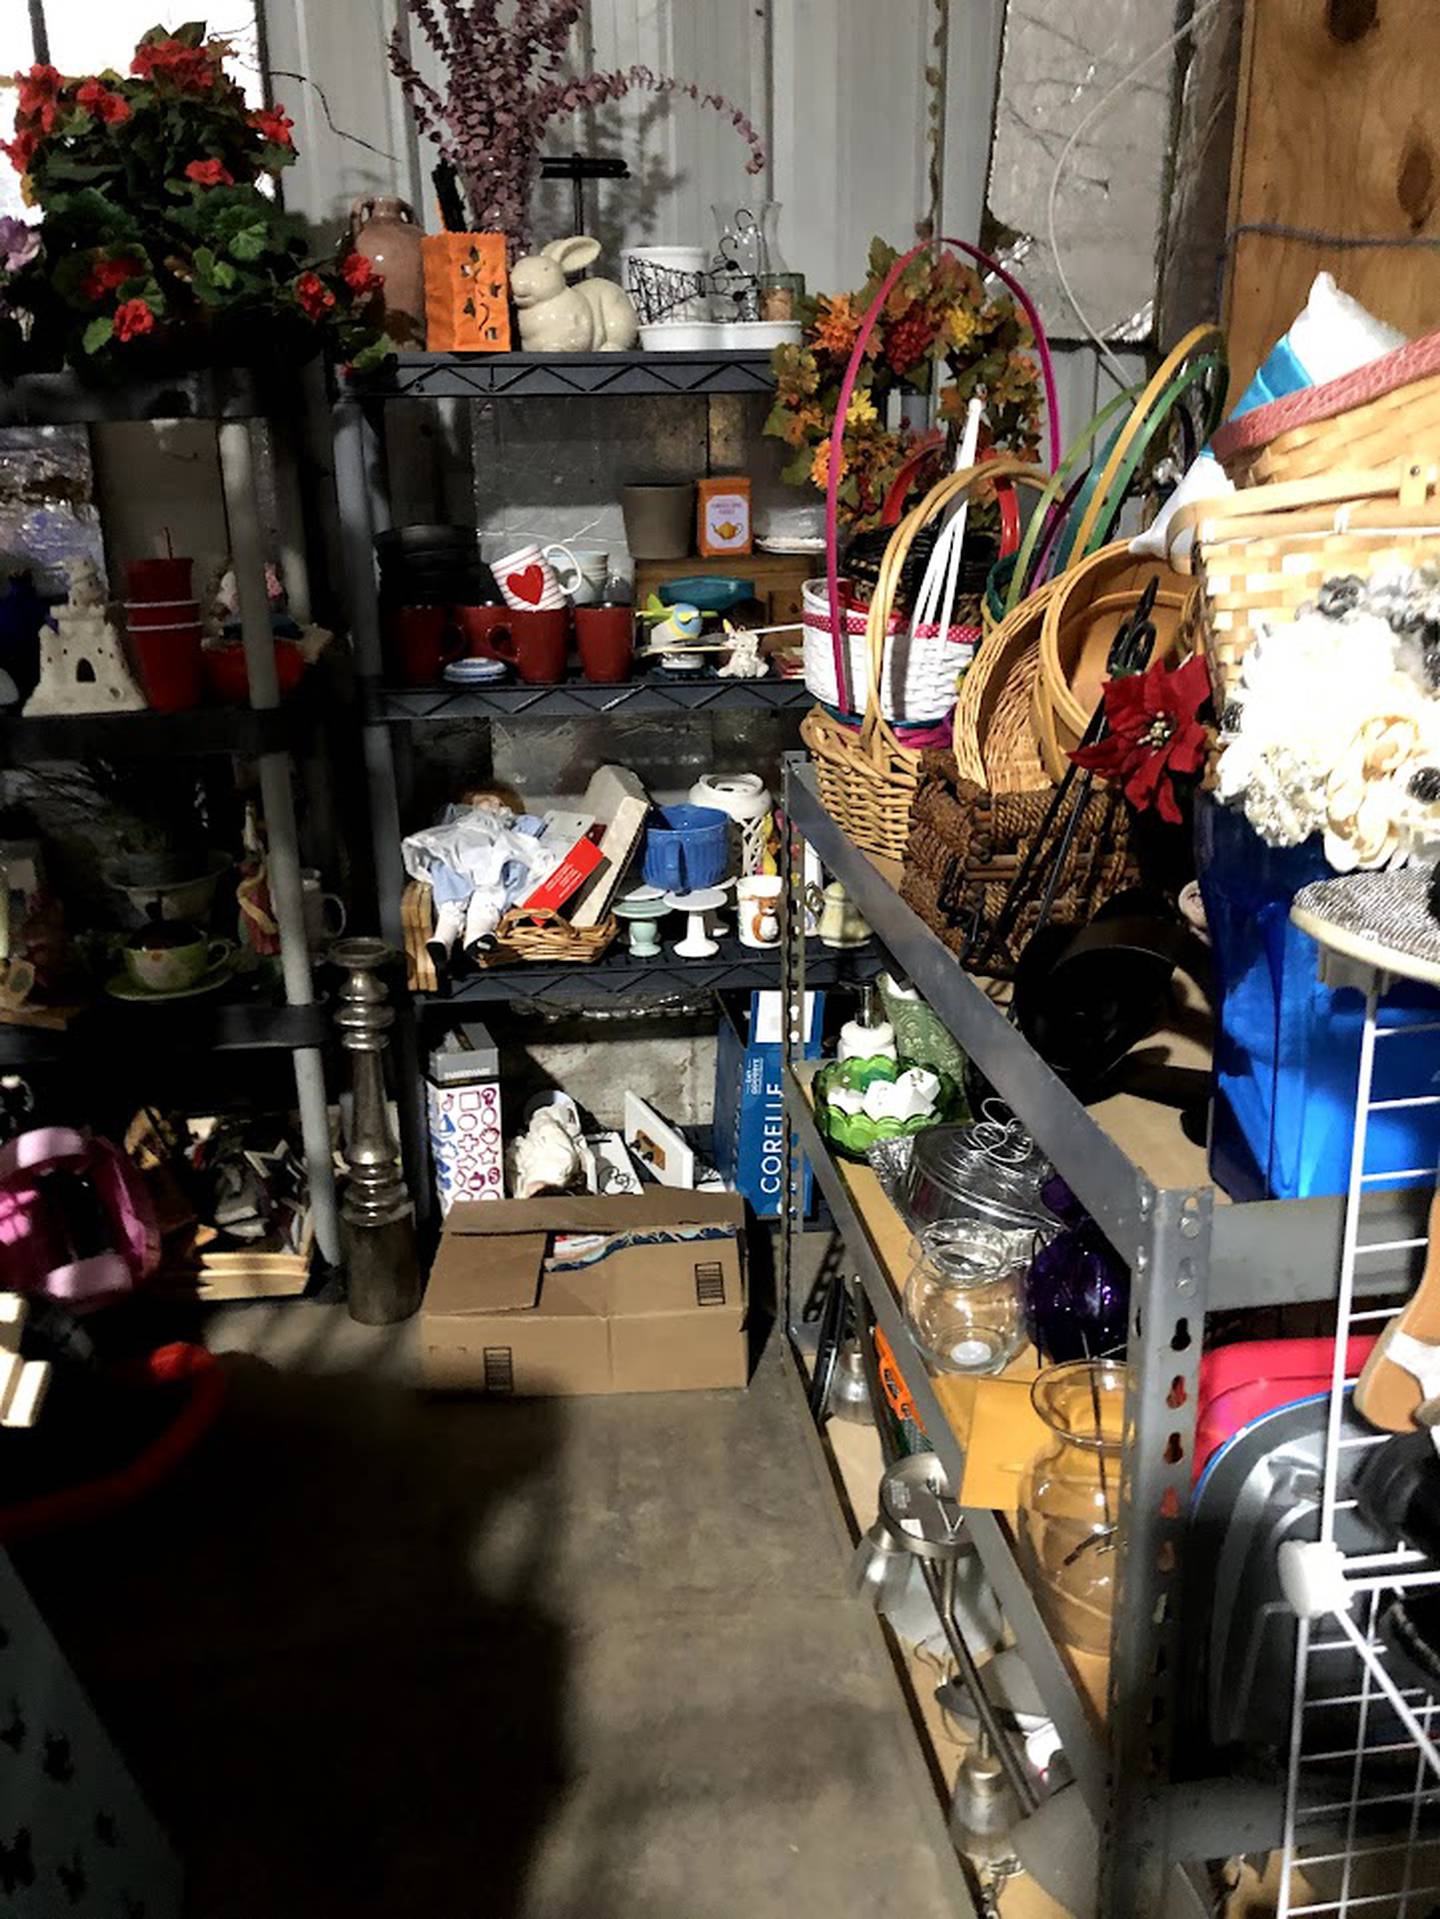 RichEnDeed, a free store in Plainfield, lost its space in October. But its founder Joette Doyle is confident someone in the community will offer space for minimal rent.